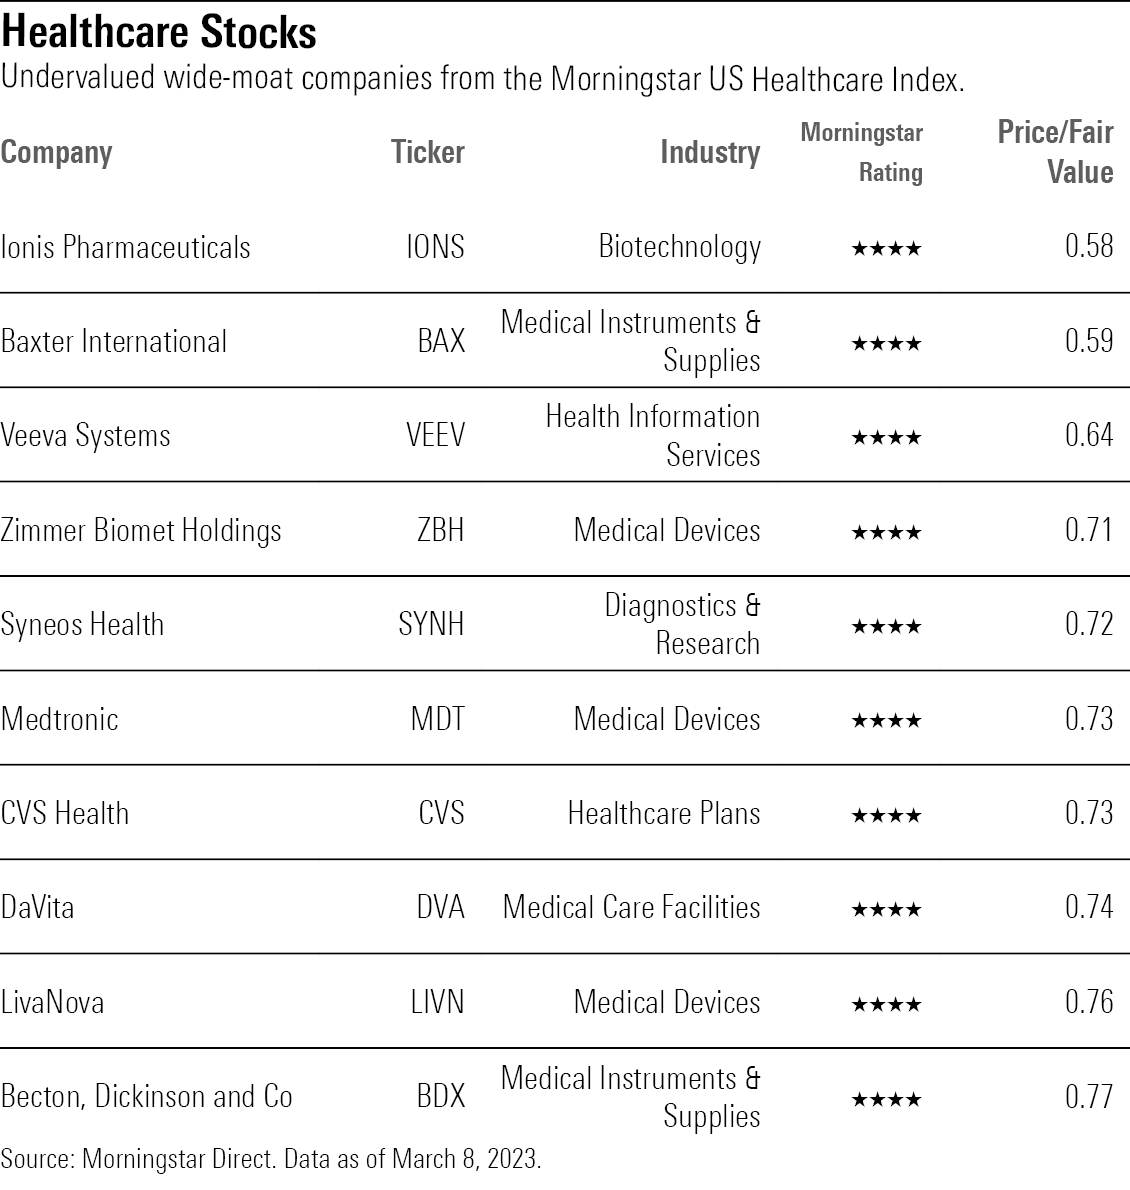 List of undervalued wide-moat companies from the Morningstar US Healthcare Index.